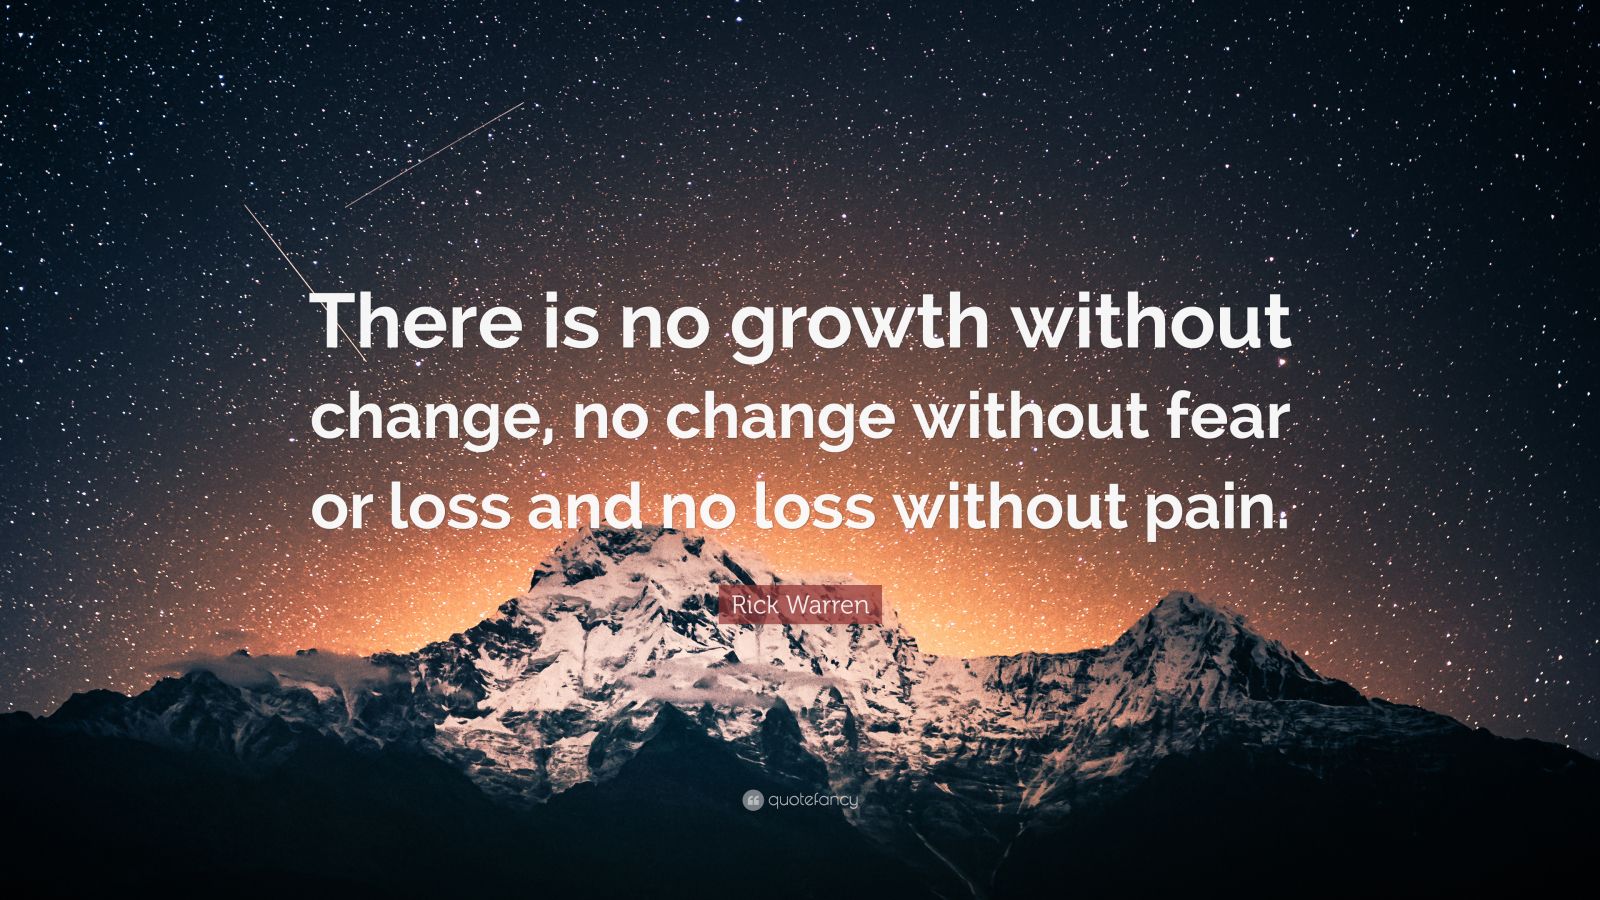 Rick Warren Quote: “There is no growth without change, no change